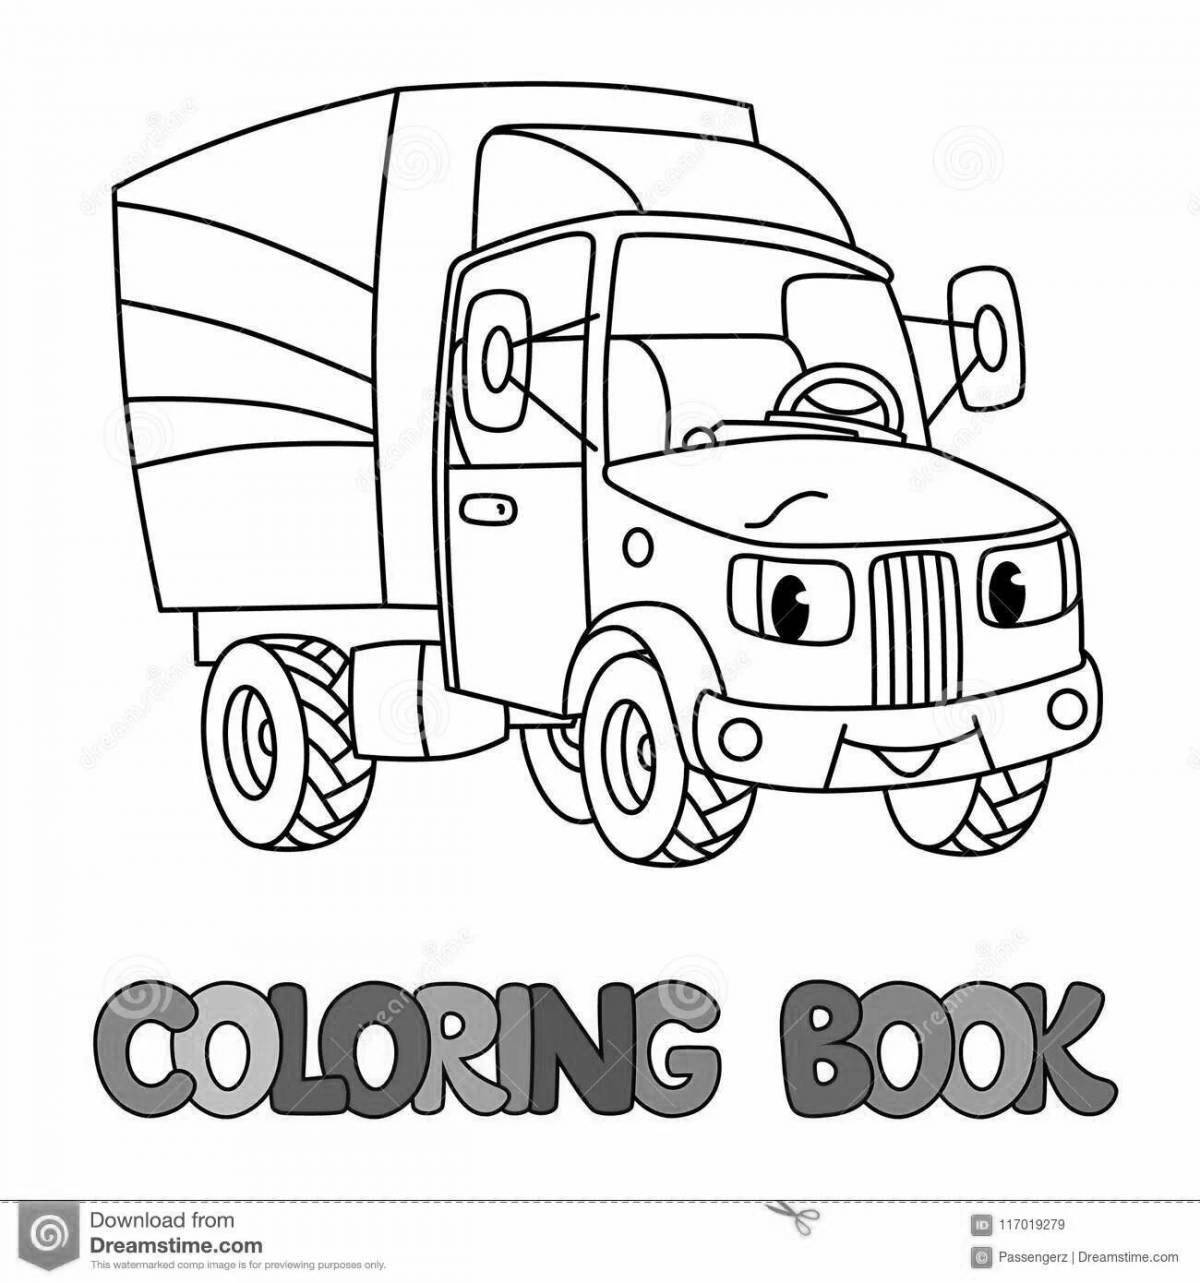 Coloring bright mail car